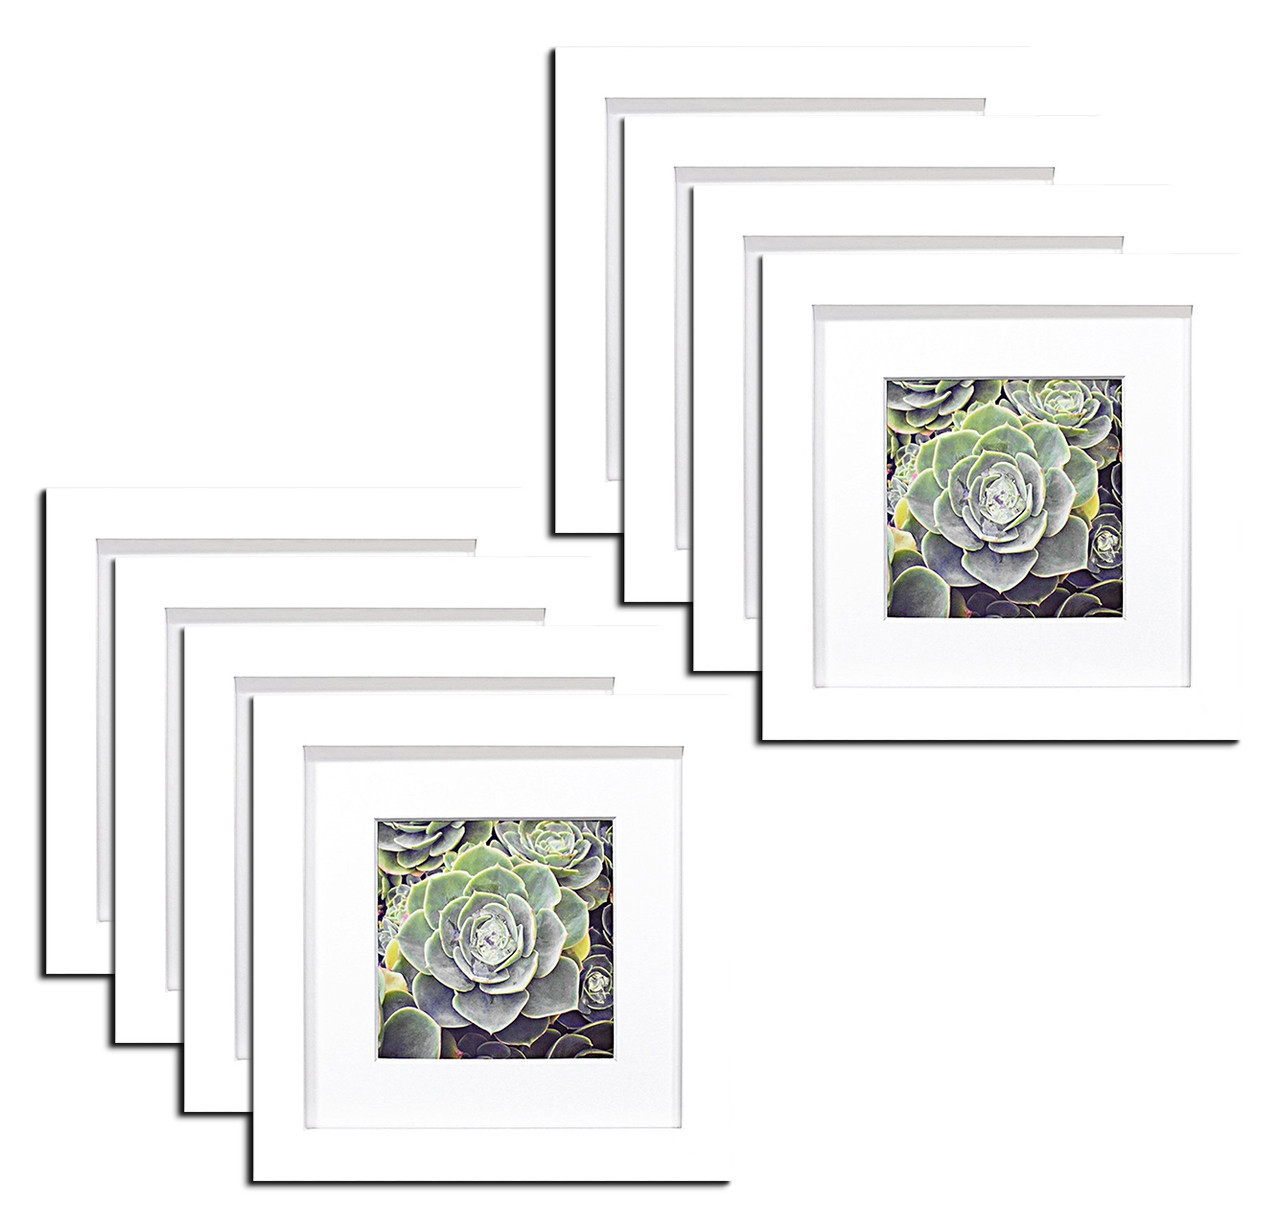 6x6 Frame for 4x4 Picture White Wood (8 Pcs per Box)